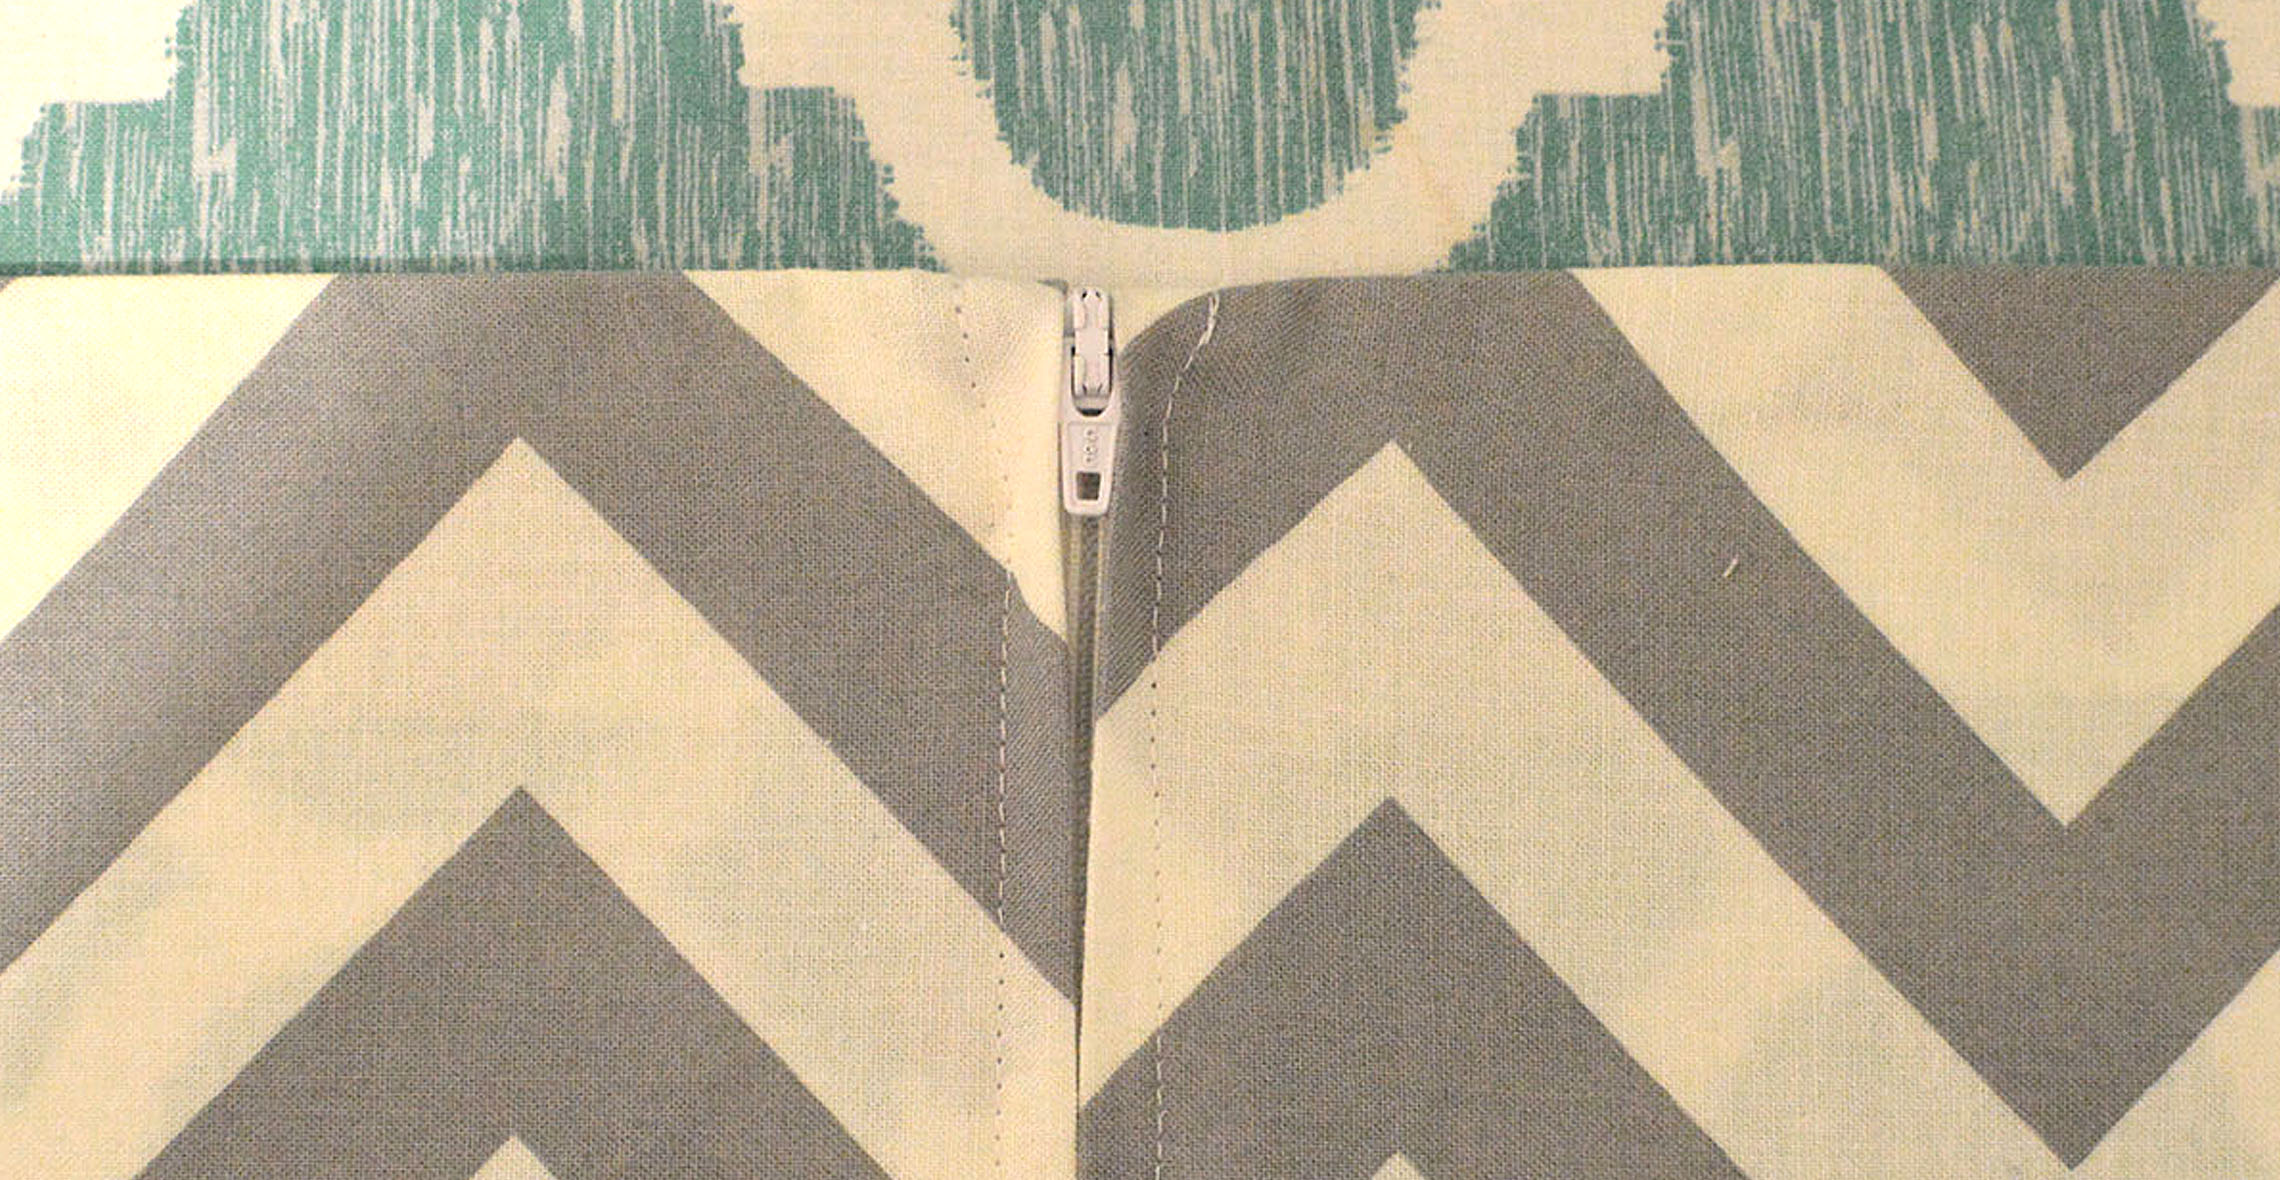 How to Sew Decorative Floating Rickrack Trim and Insertion - WeAllSew